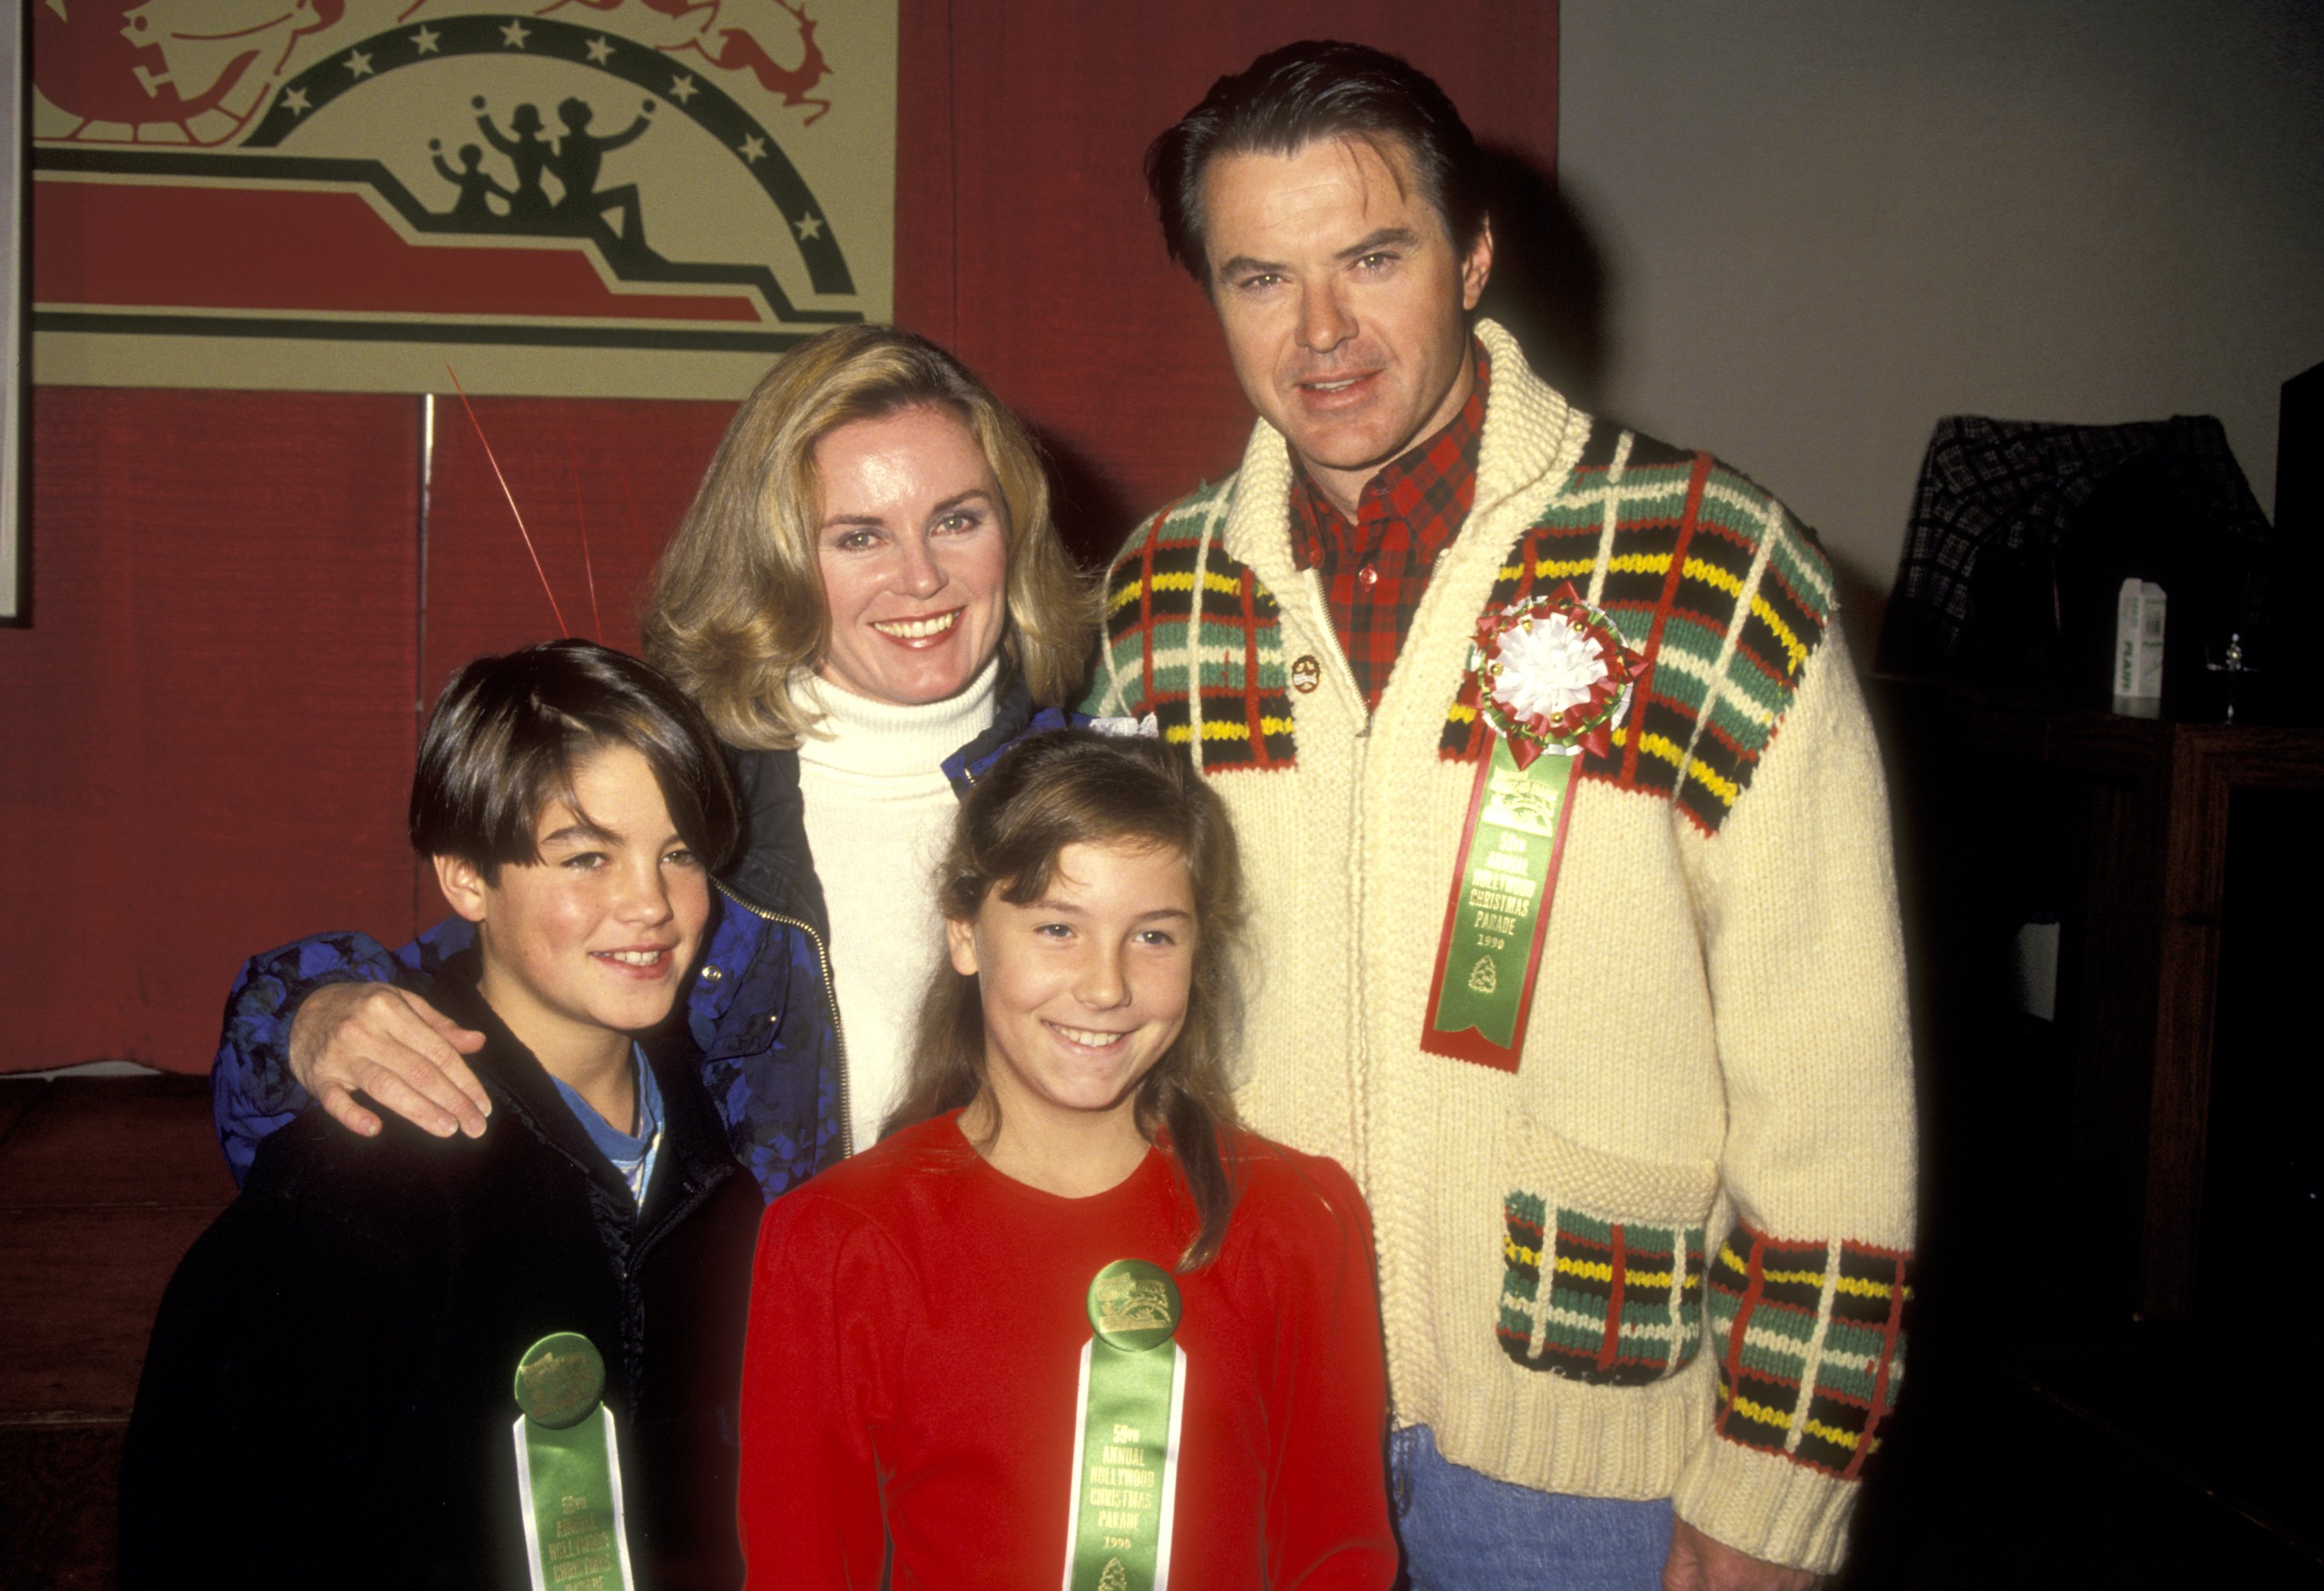 Robert Urich, wife Heather Menzies, son Ryan Urich ,and daughter Emily Urich at the 59th Annual Hollywood Christmas Parade 1990, Hollywood, California. | Source: Getty Images